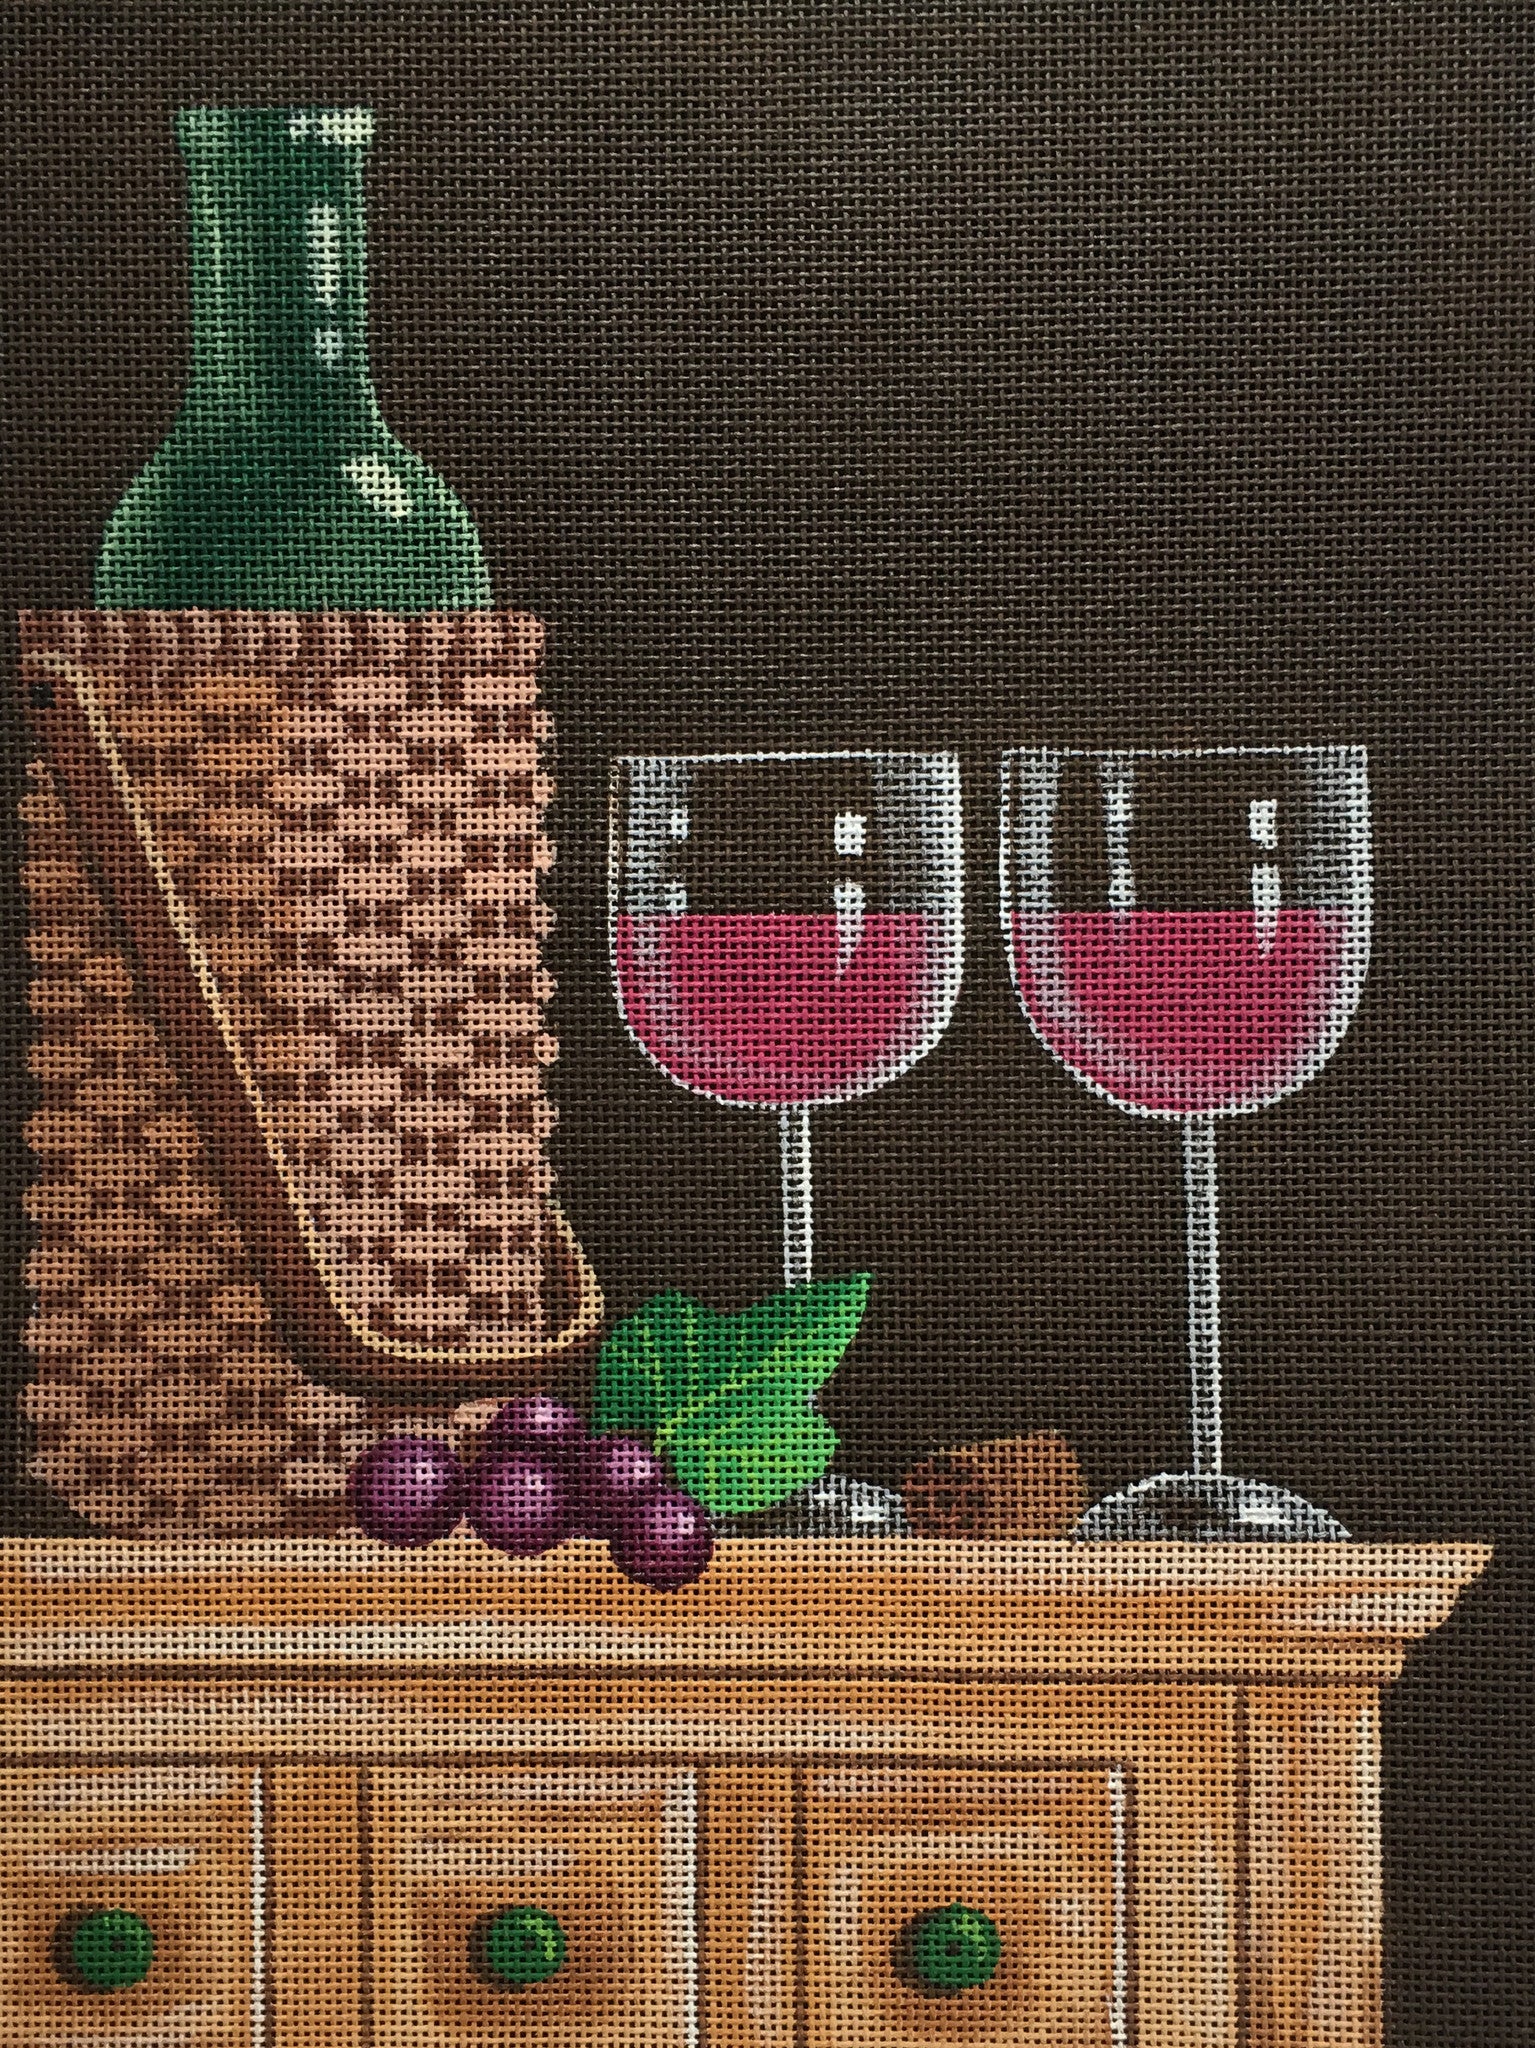 Kim Leo rustic needlepoint canvas of a bottle of wine and two glasses on a farmhouse chest with grapes